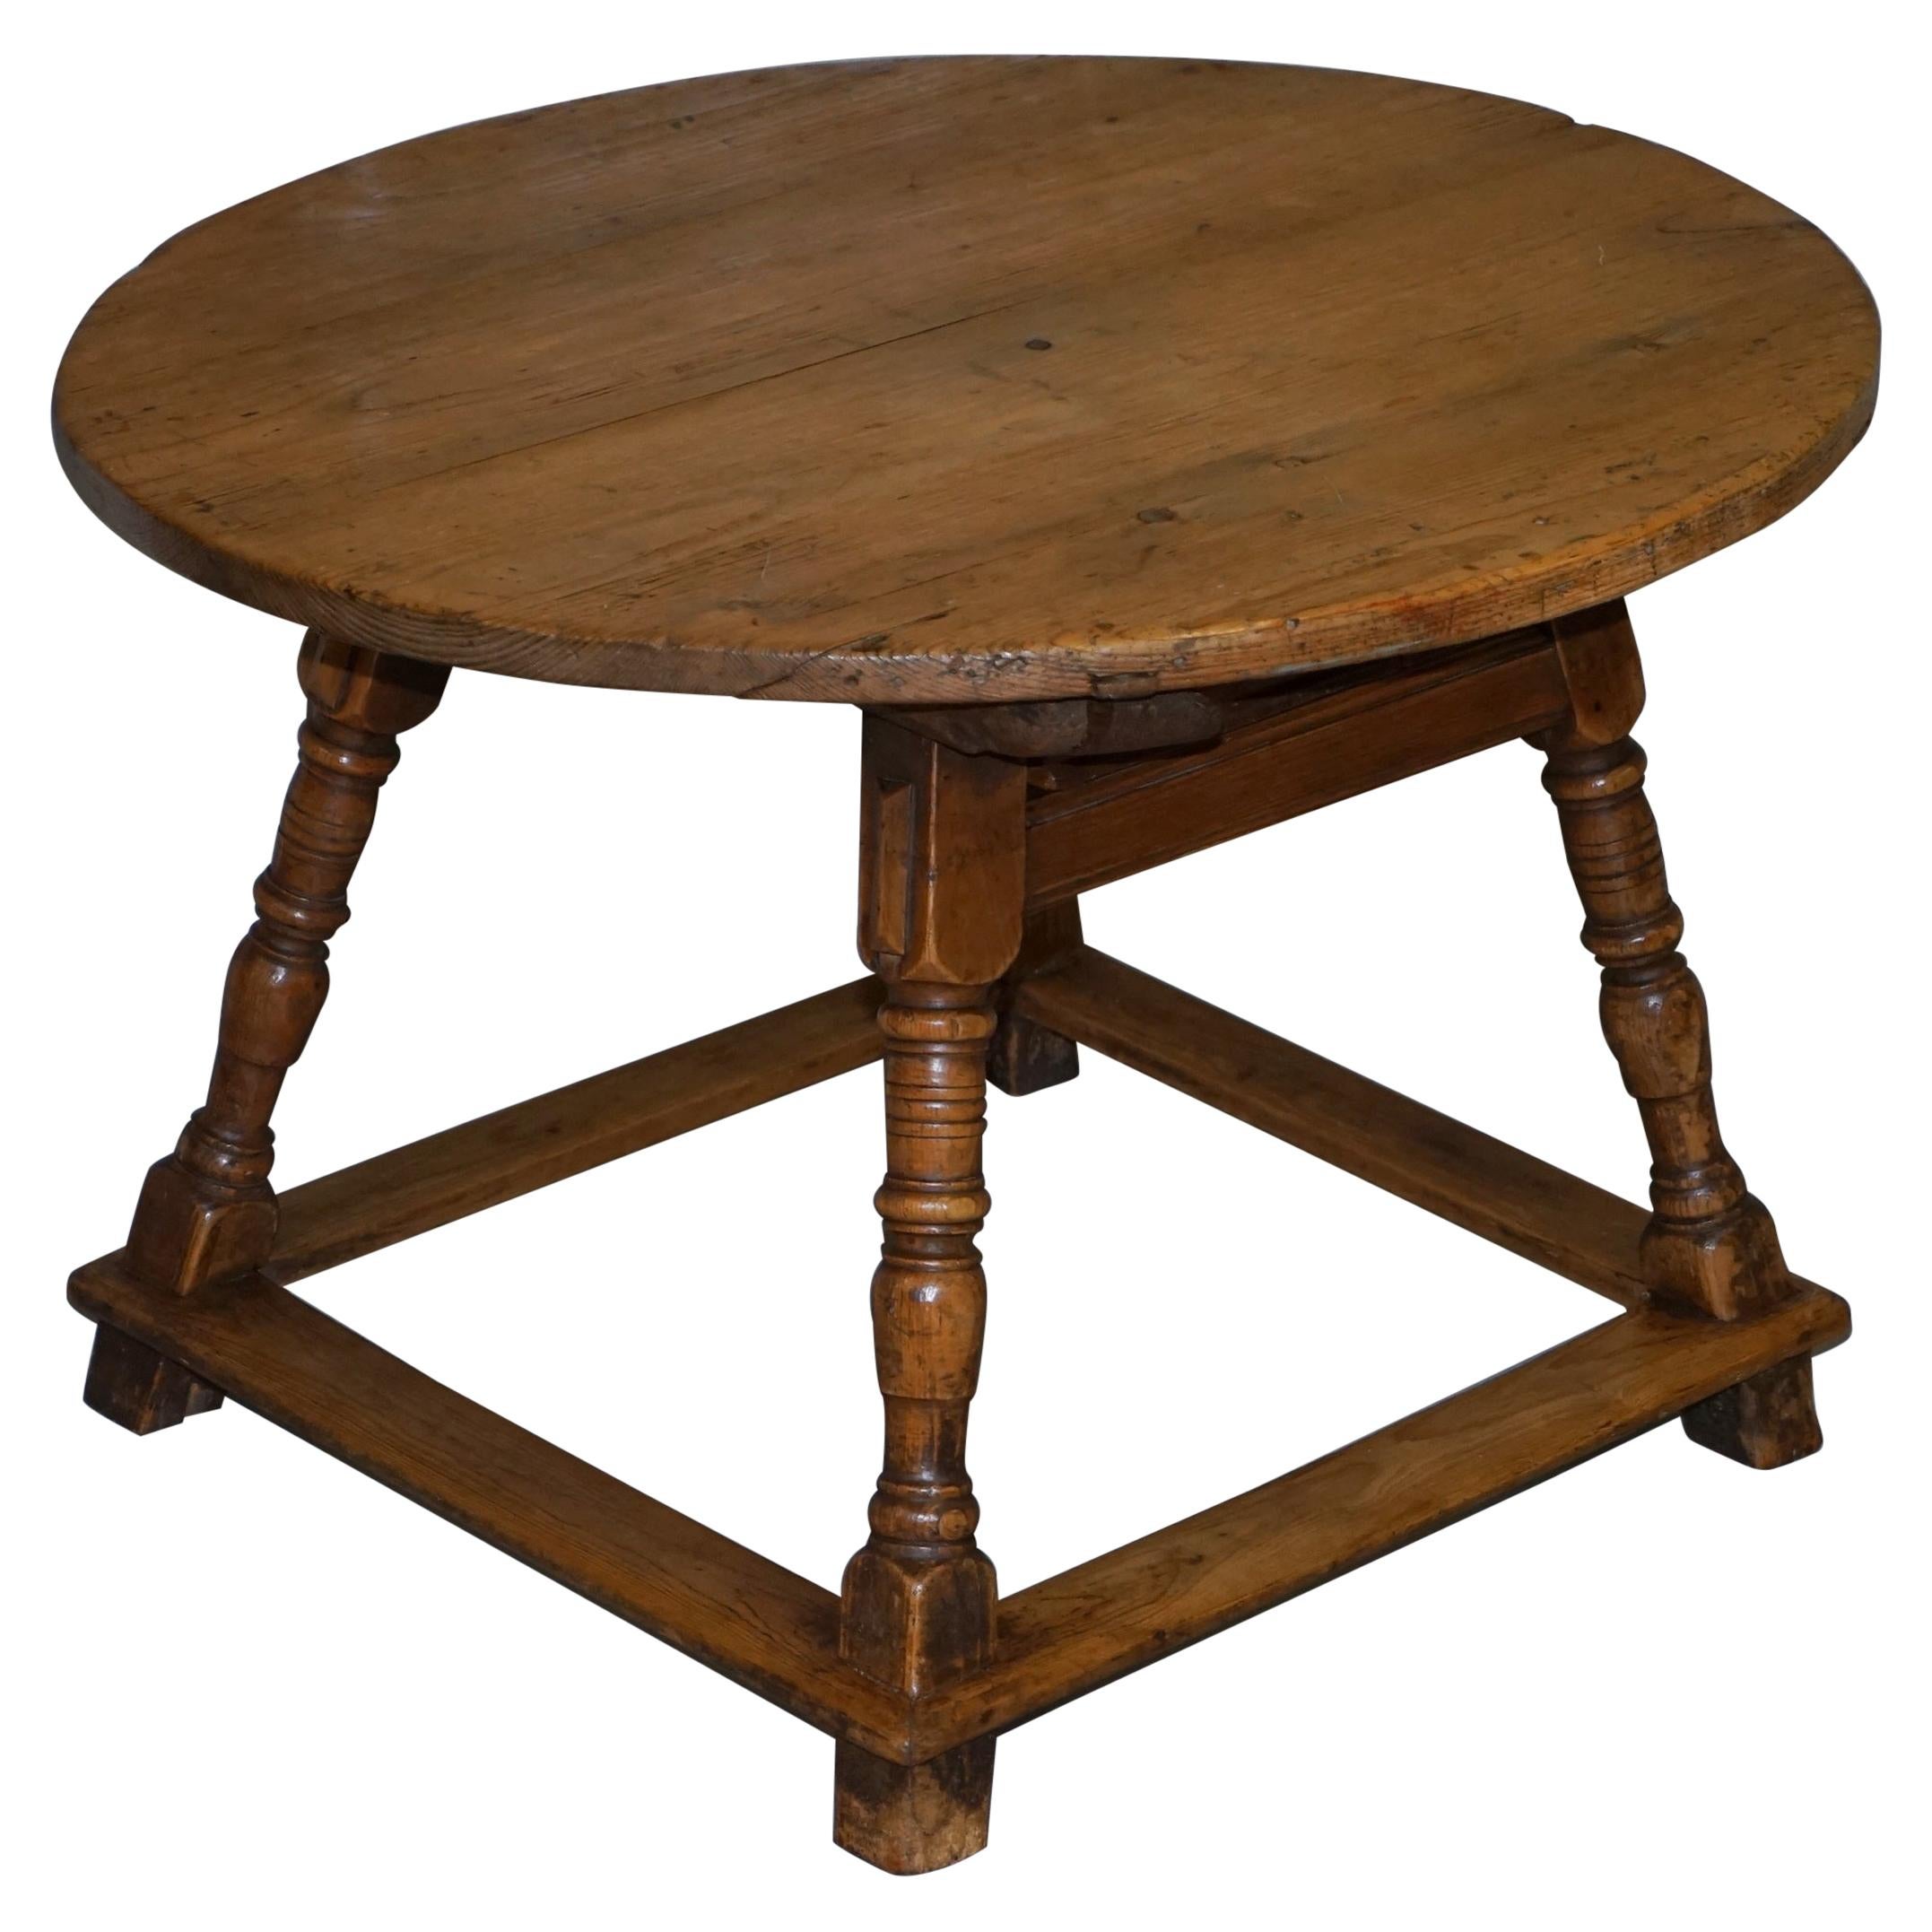 Very Rare circa 1780 Country House Pine Round Dining Table Large Single-Drawer